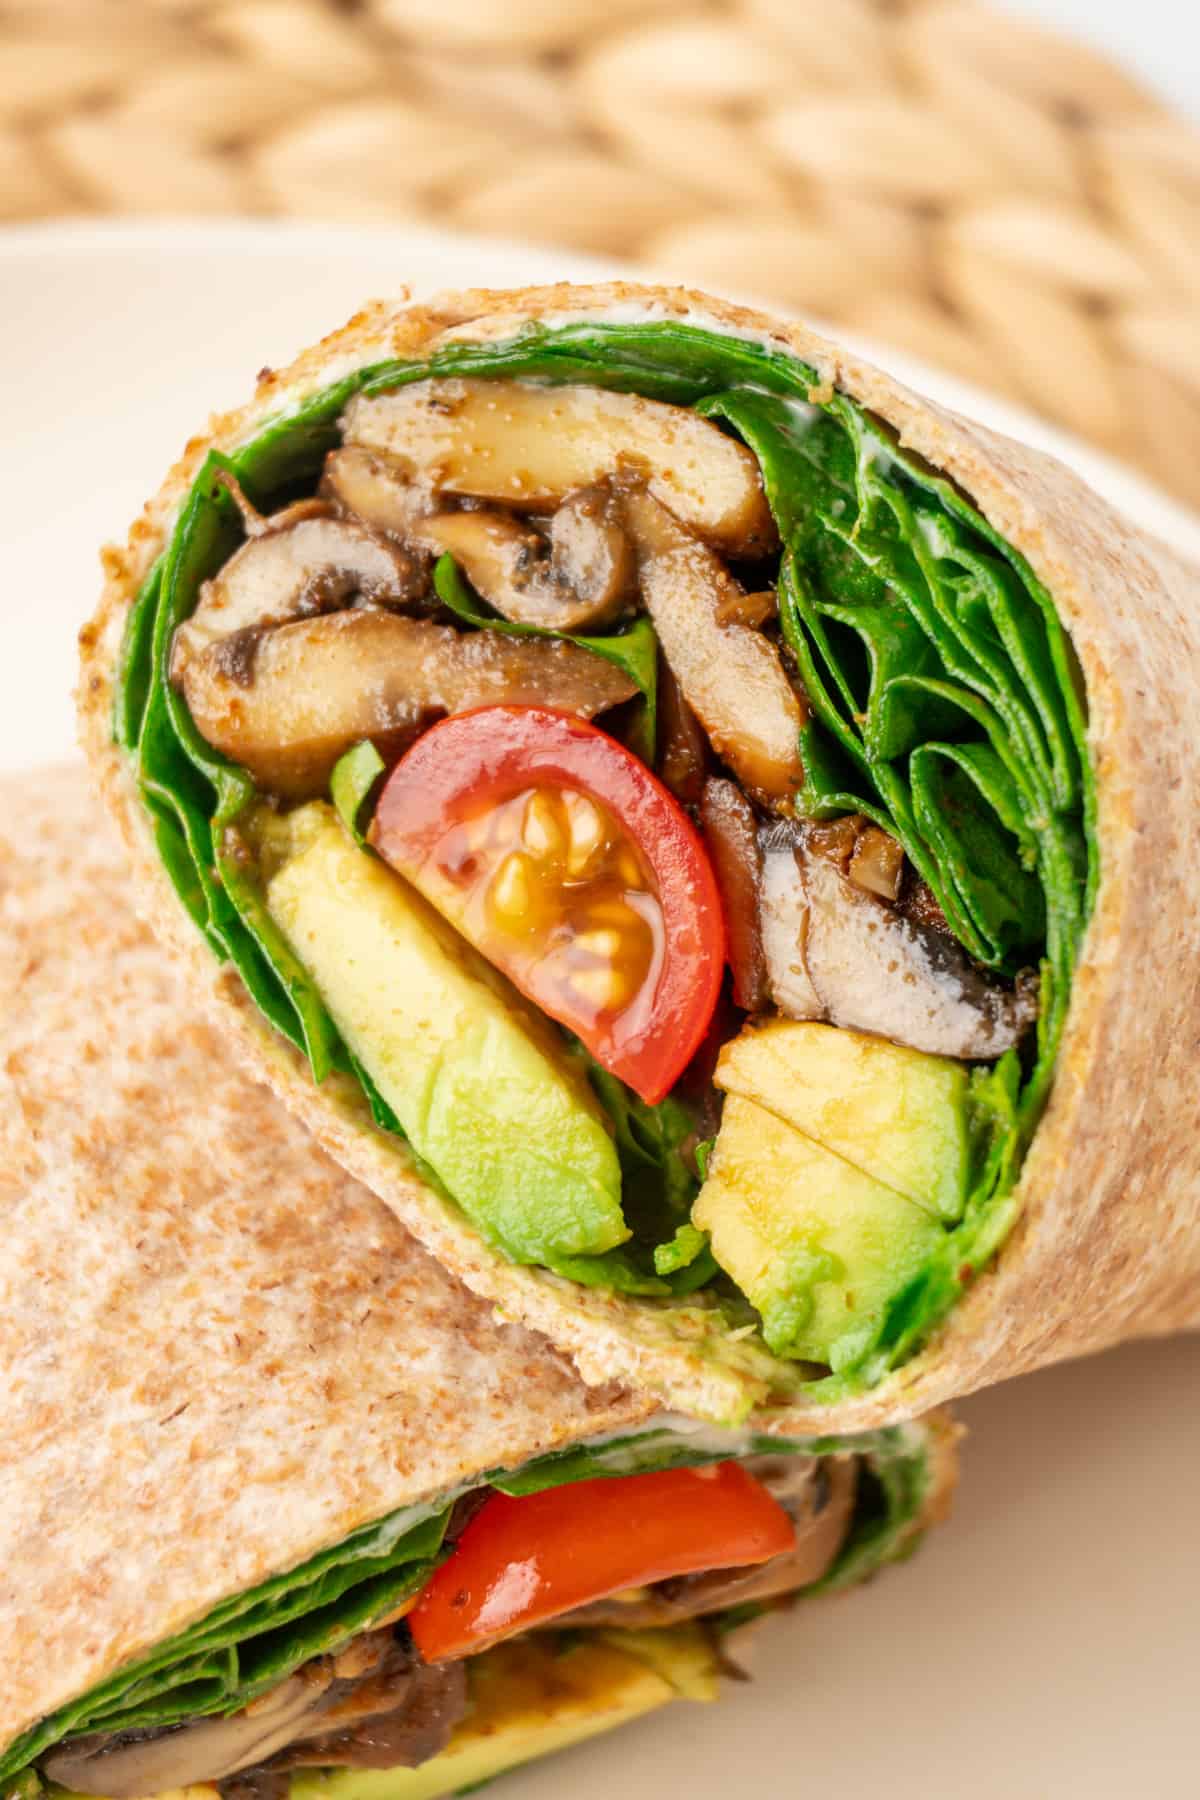 A wholemeal wrap cut in half, filled with juicy mushrooms and salad.